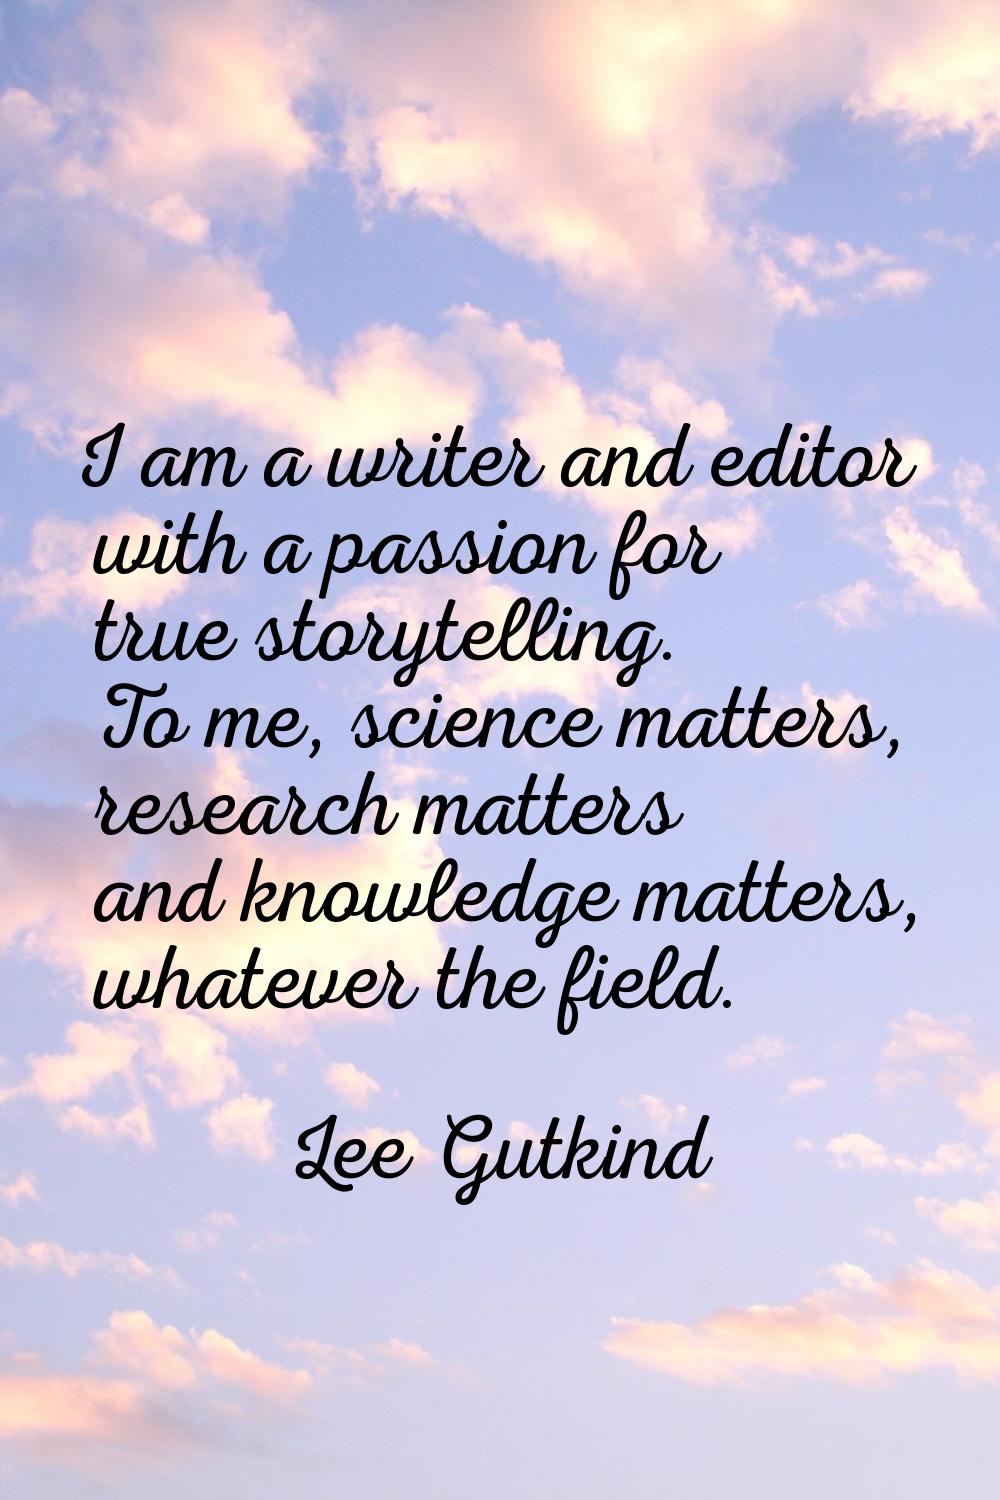 I am a writer and editor with a passion for true storytelling. To me, science matters, research mat